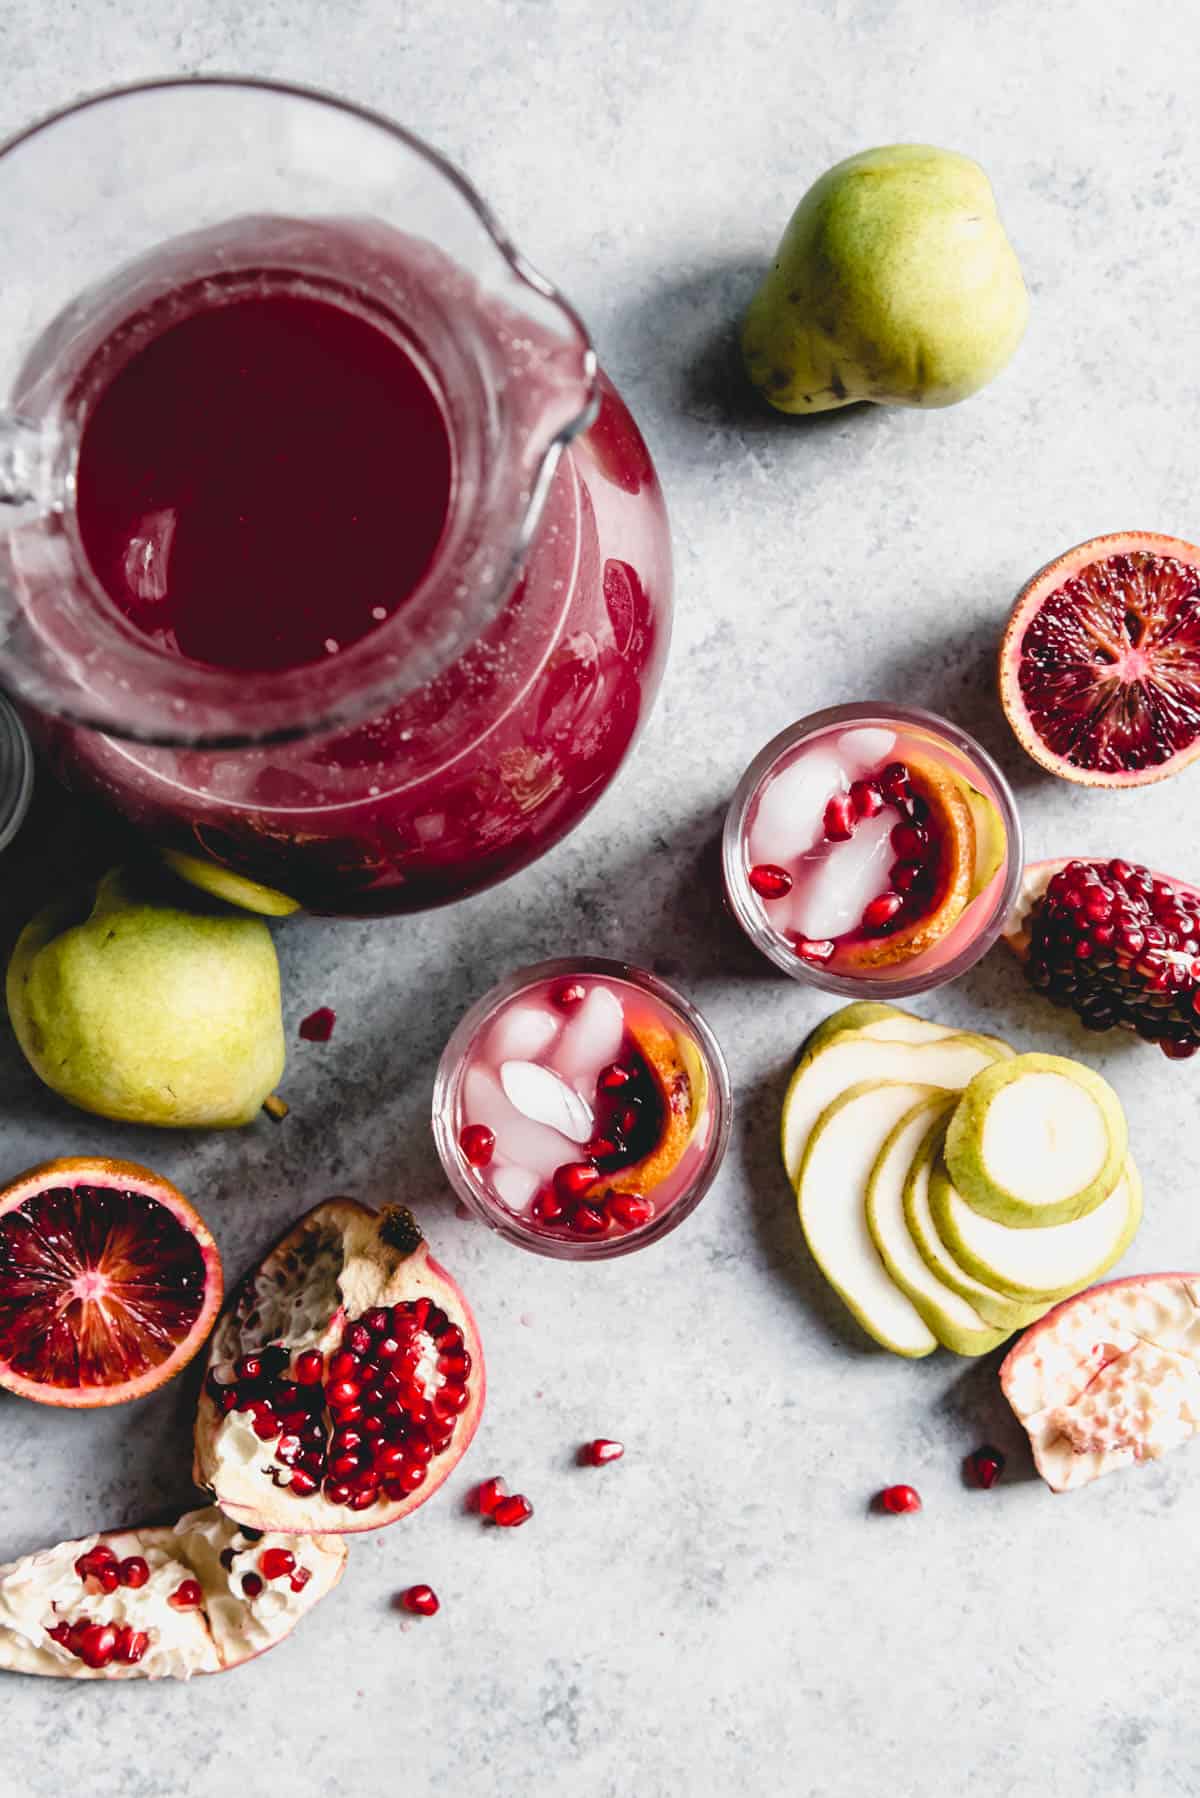 An image of a pitcher of a sparkling fruit punch in a pitcher with a couple of glasses garnished with pears, blood oranges, and pomegranate seeds beside it.